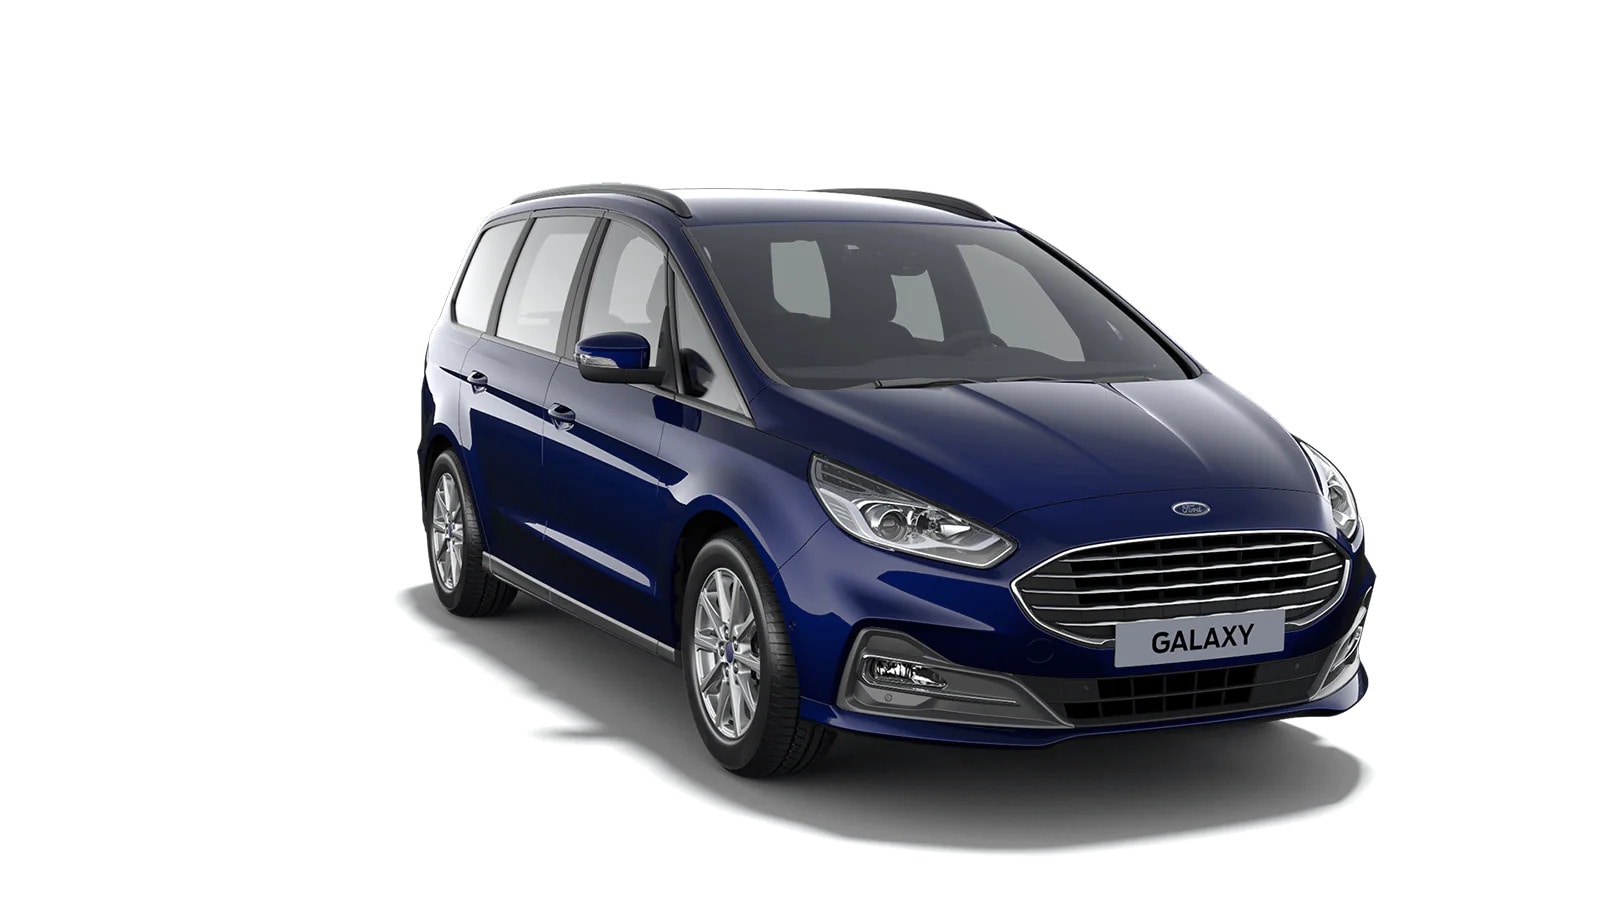 Blue Ford Galaxy Zetec from 3/4 front view